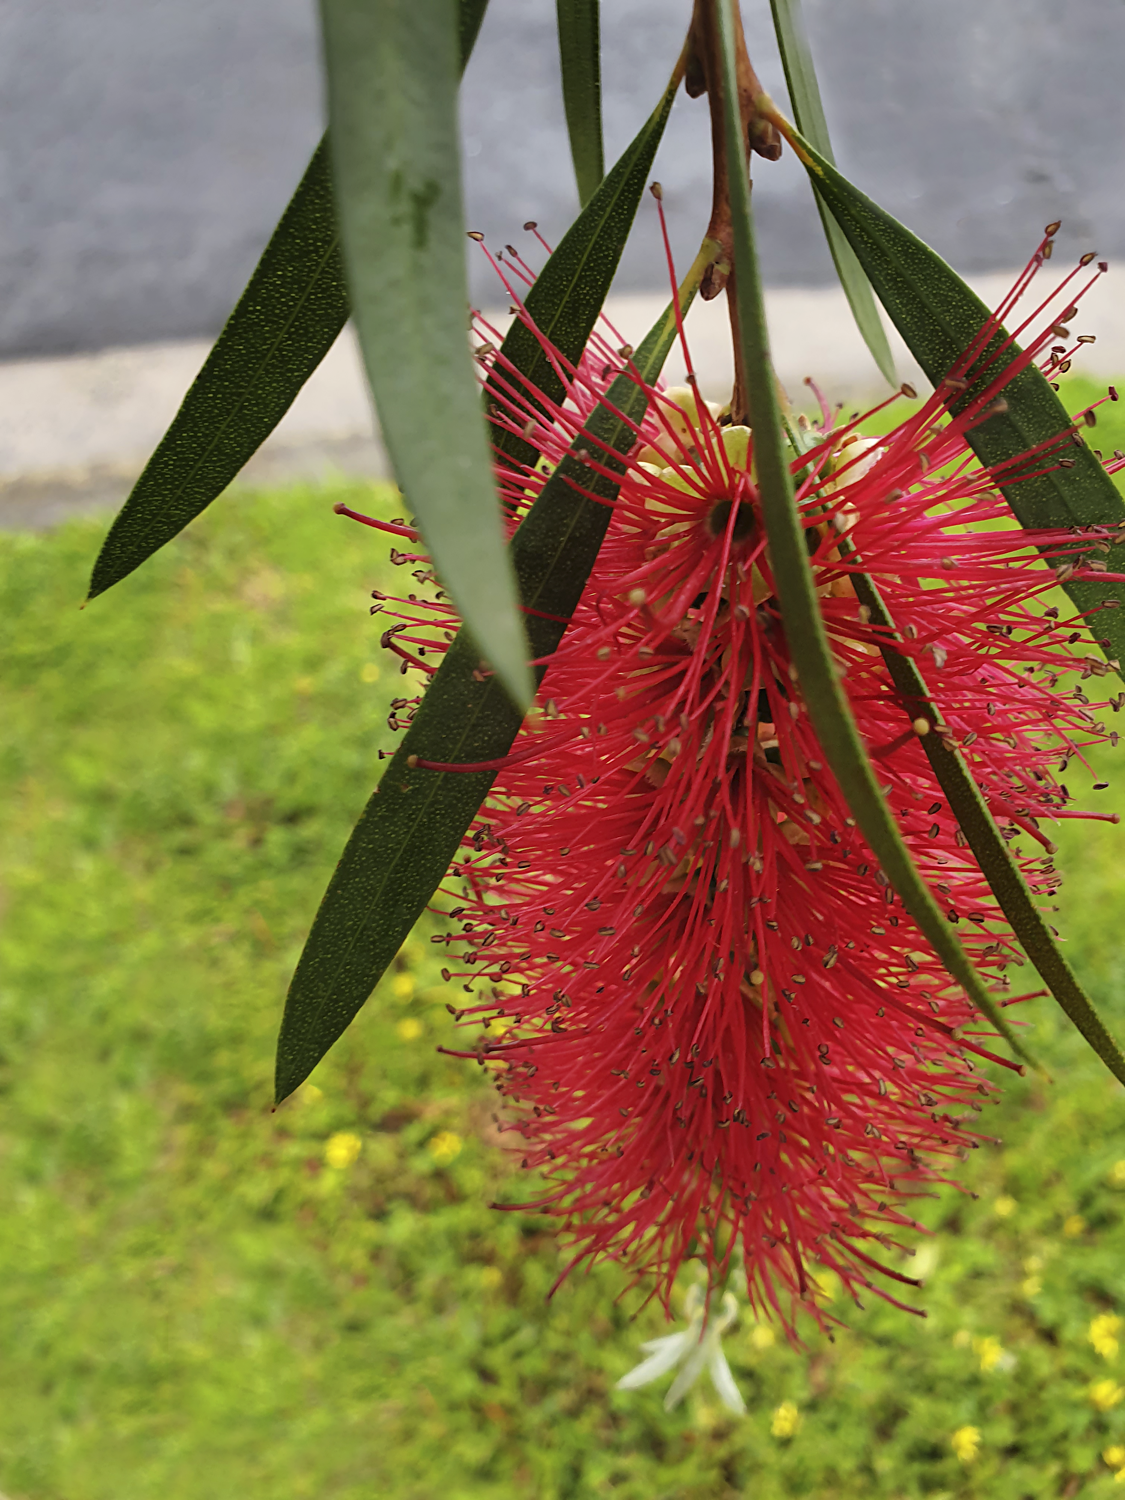 Colour photograph of close up red bottle brush hanging from tree, grass and road in background.